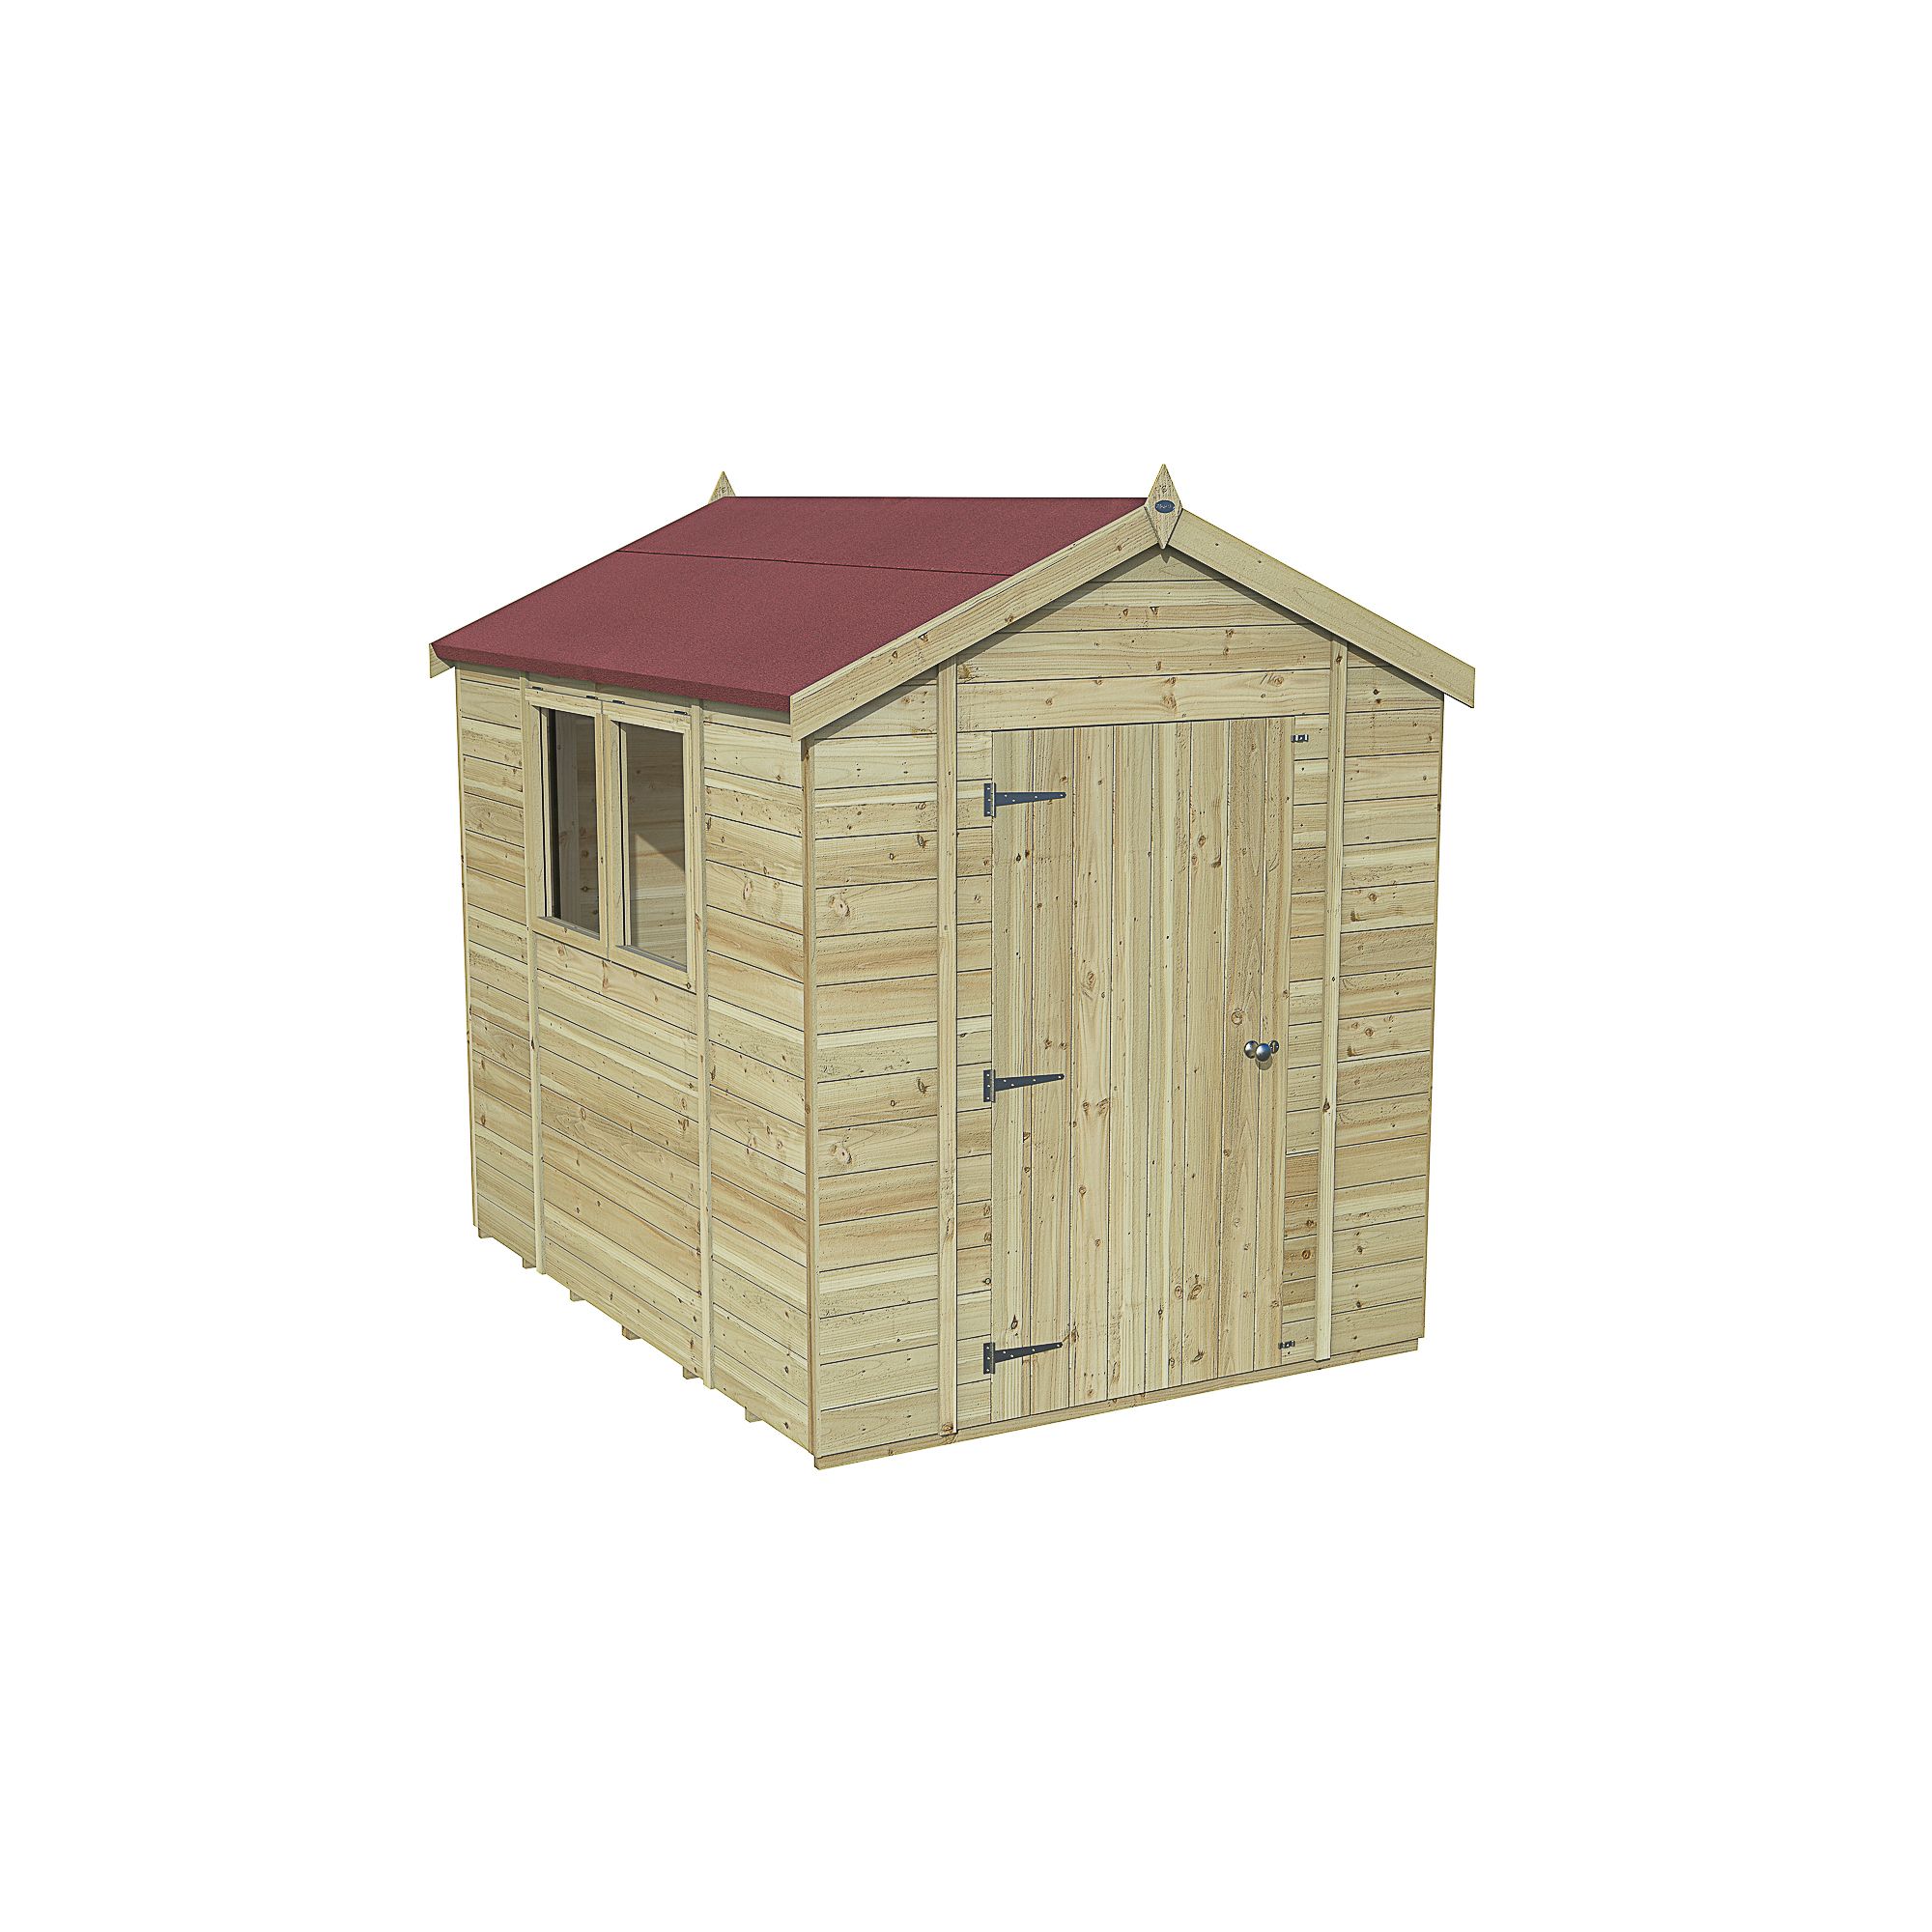 Forest Garden Timberdale 8x6 ft Apex Wooden Shed with floor